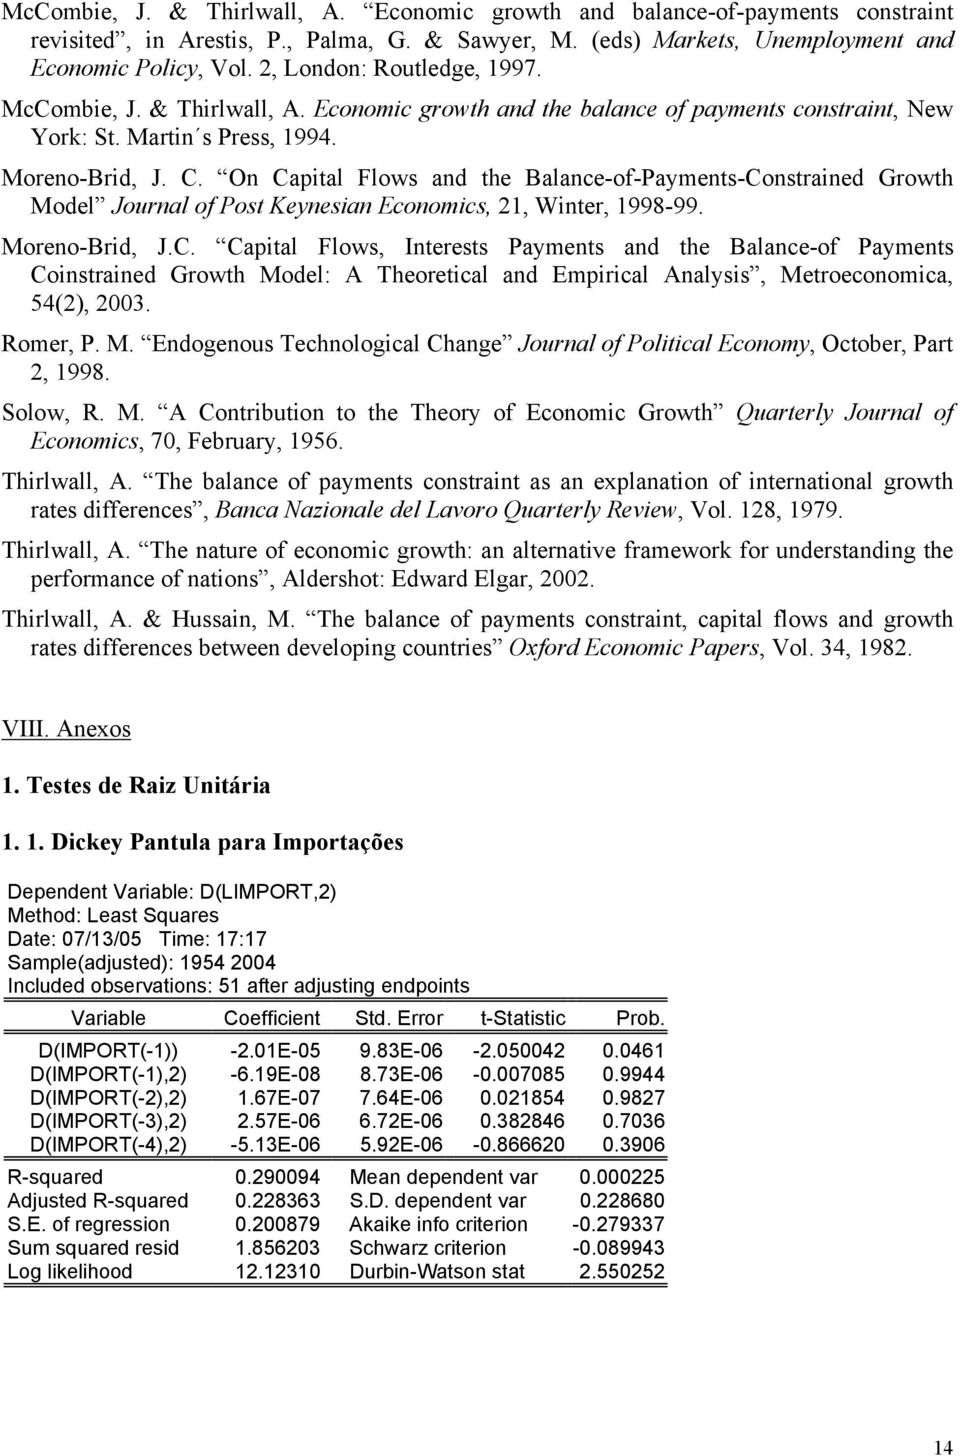 On Capital Flows and the Balance-of-Payments-Constrained Growth Model Journal of Post Keynesian Economics, 21, Winter, 1998-99. Moreno-Brid, J.C. Capital Flows, Interests Payments and the Balance-of Payments Coinstrained Growth Model: A Theoretical and Empirical Analysis, Metroeconomica, 54(2), 2003.